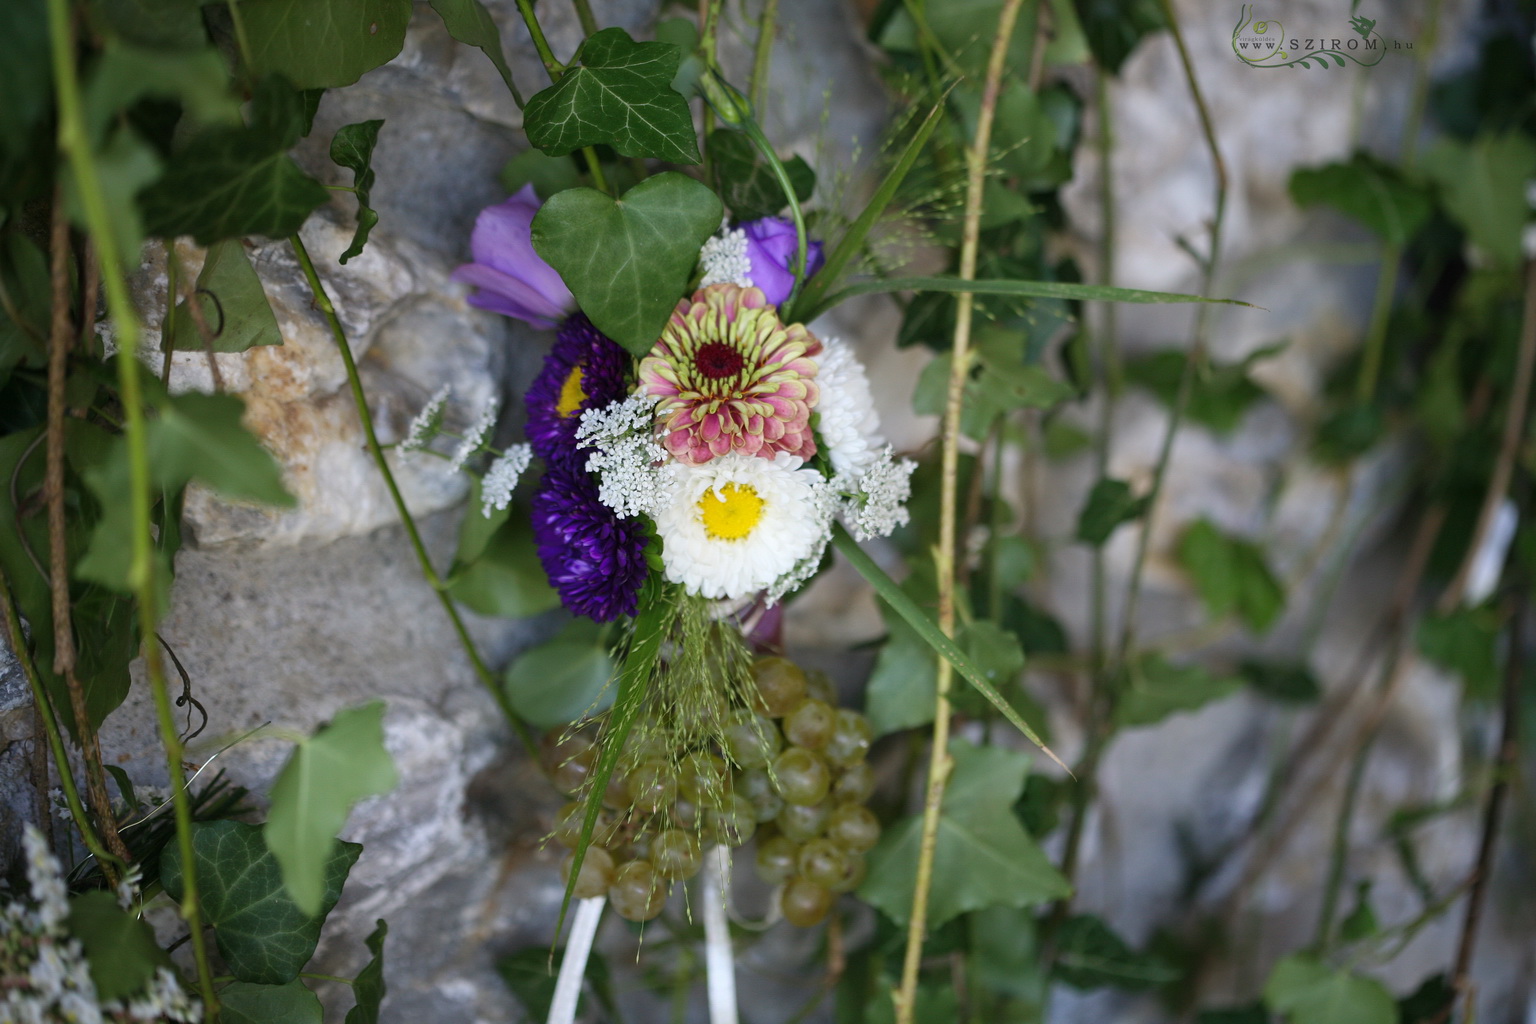 flower delivery Budapest - wine-style garlands with grapes, asters and tiny flowers Bélapátfalva (purple), wedding